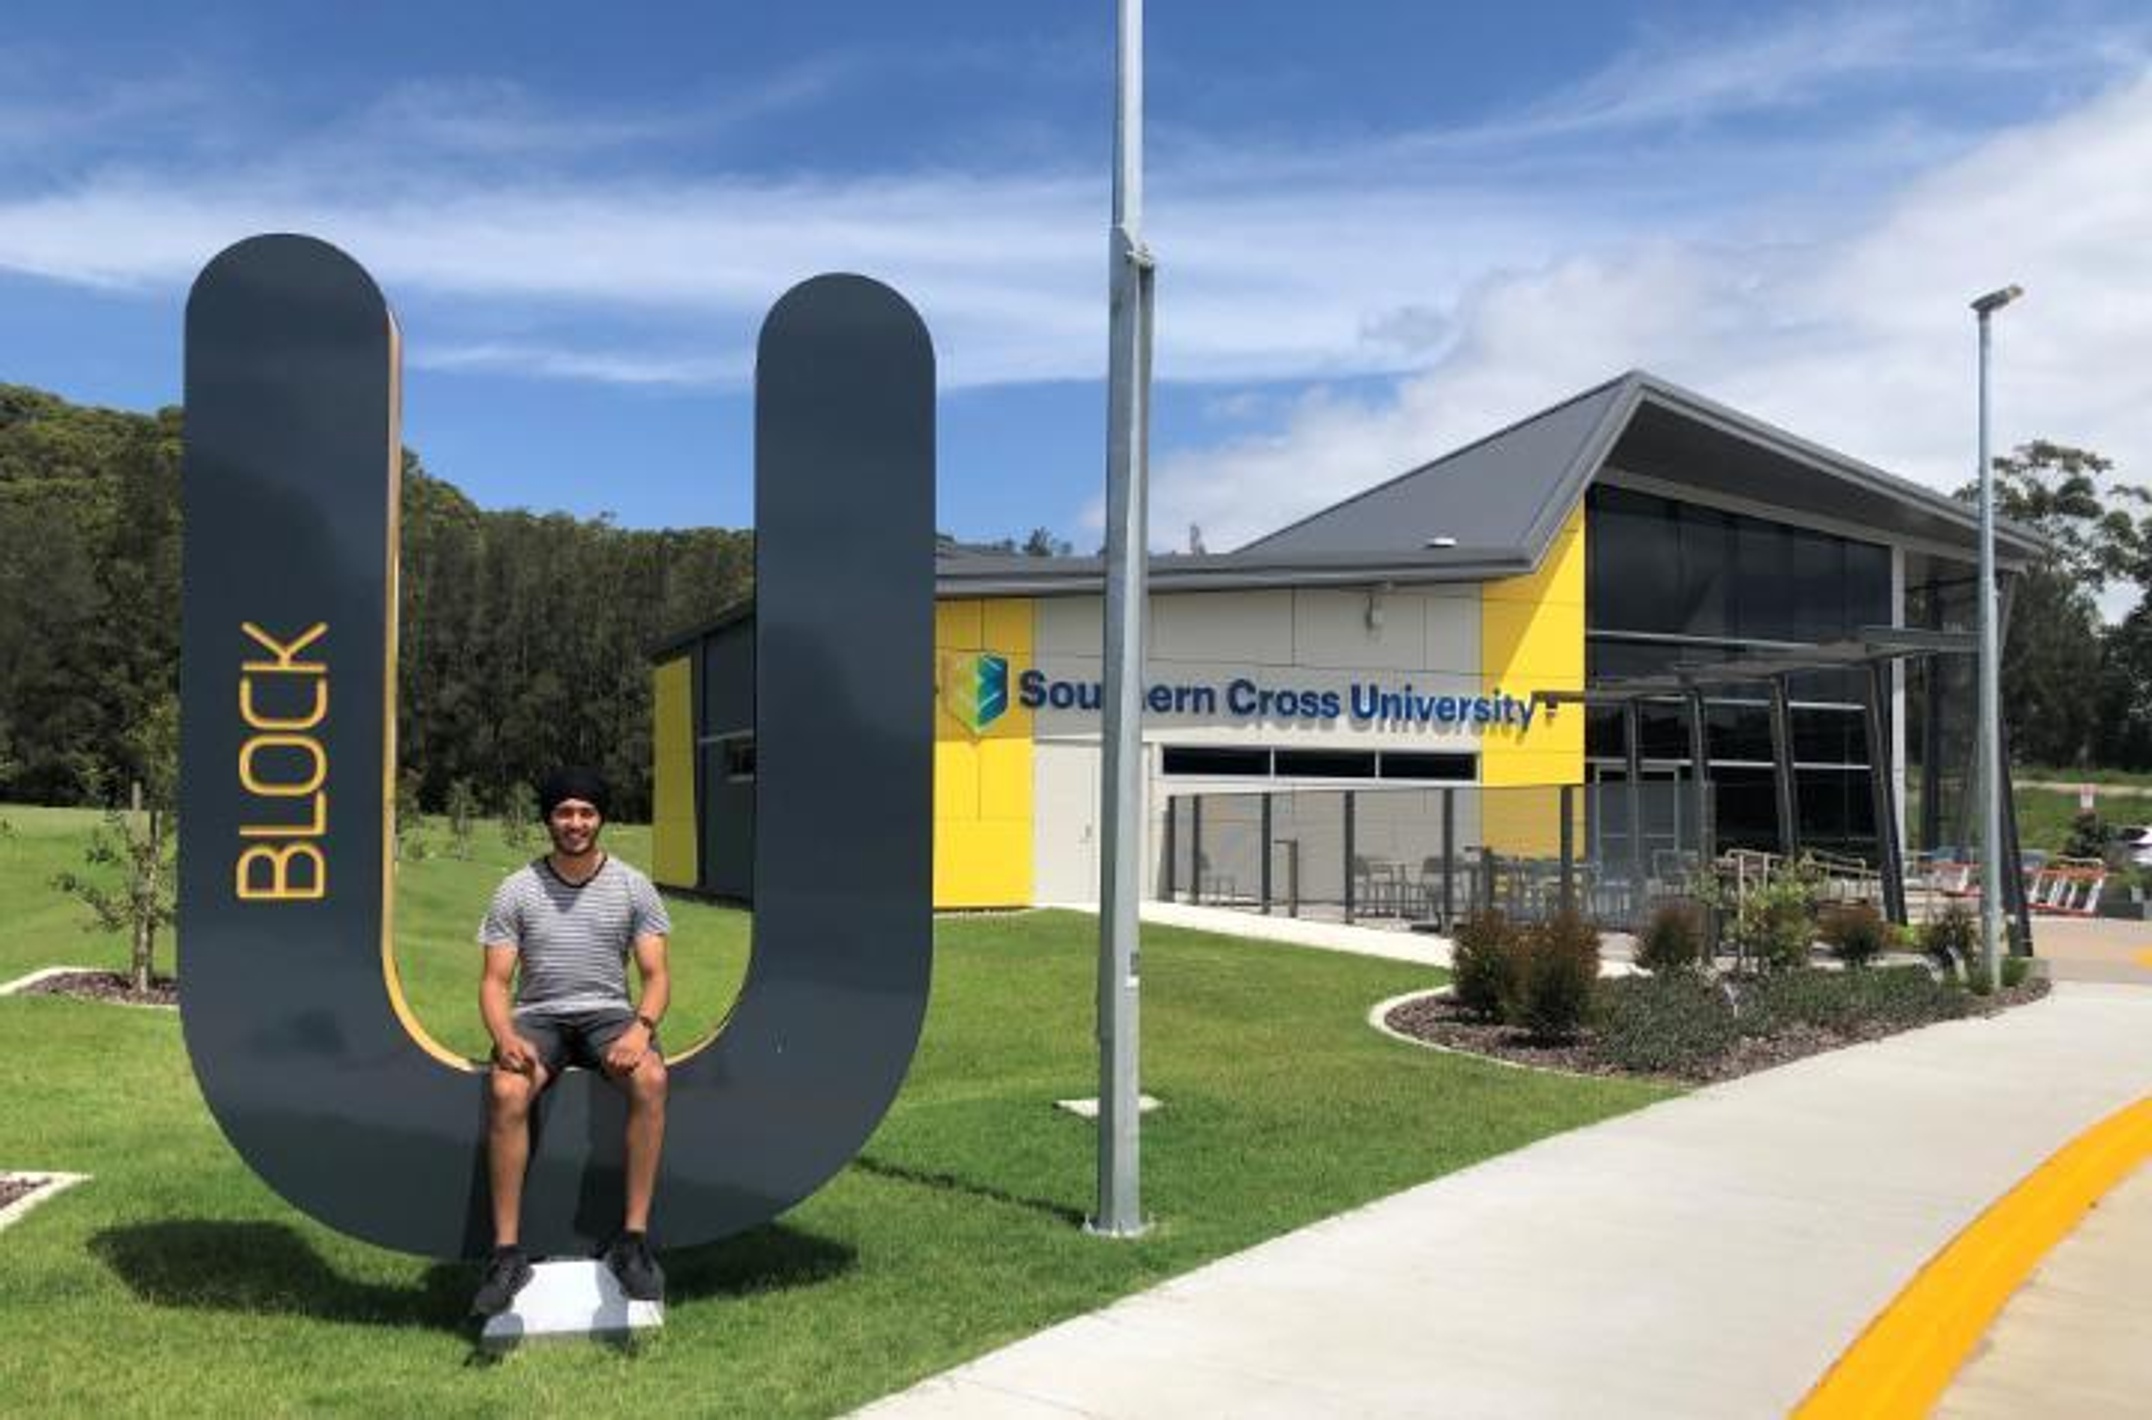 Student sitting on a large U-shaped letter outside a Southern Cross University building